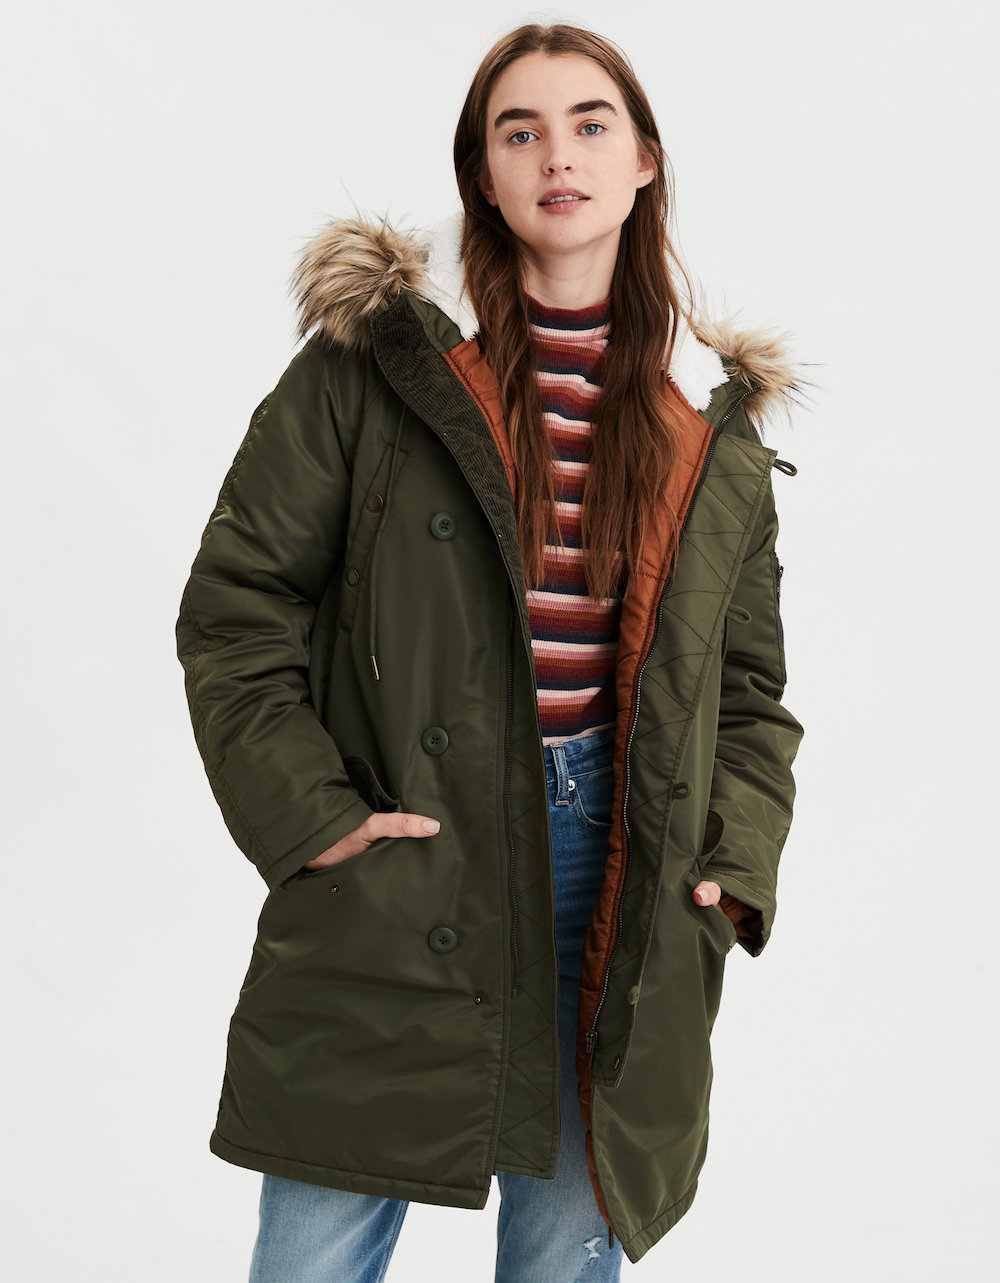 American Eagle Women's & Men's Parkas Only $29.99 (Regularly up to $150)